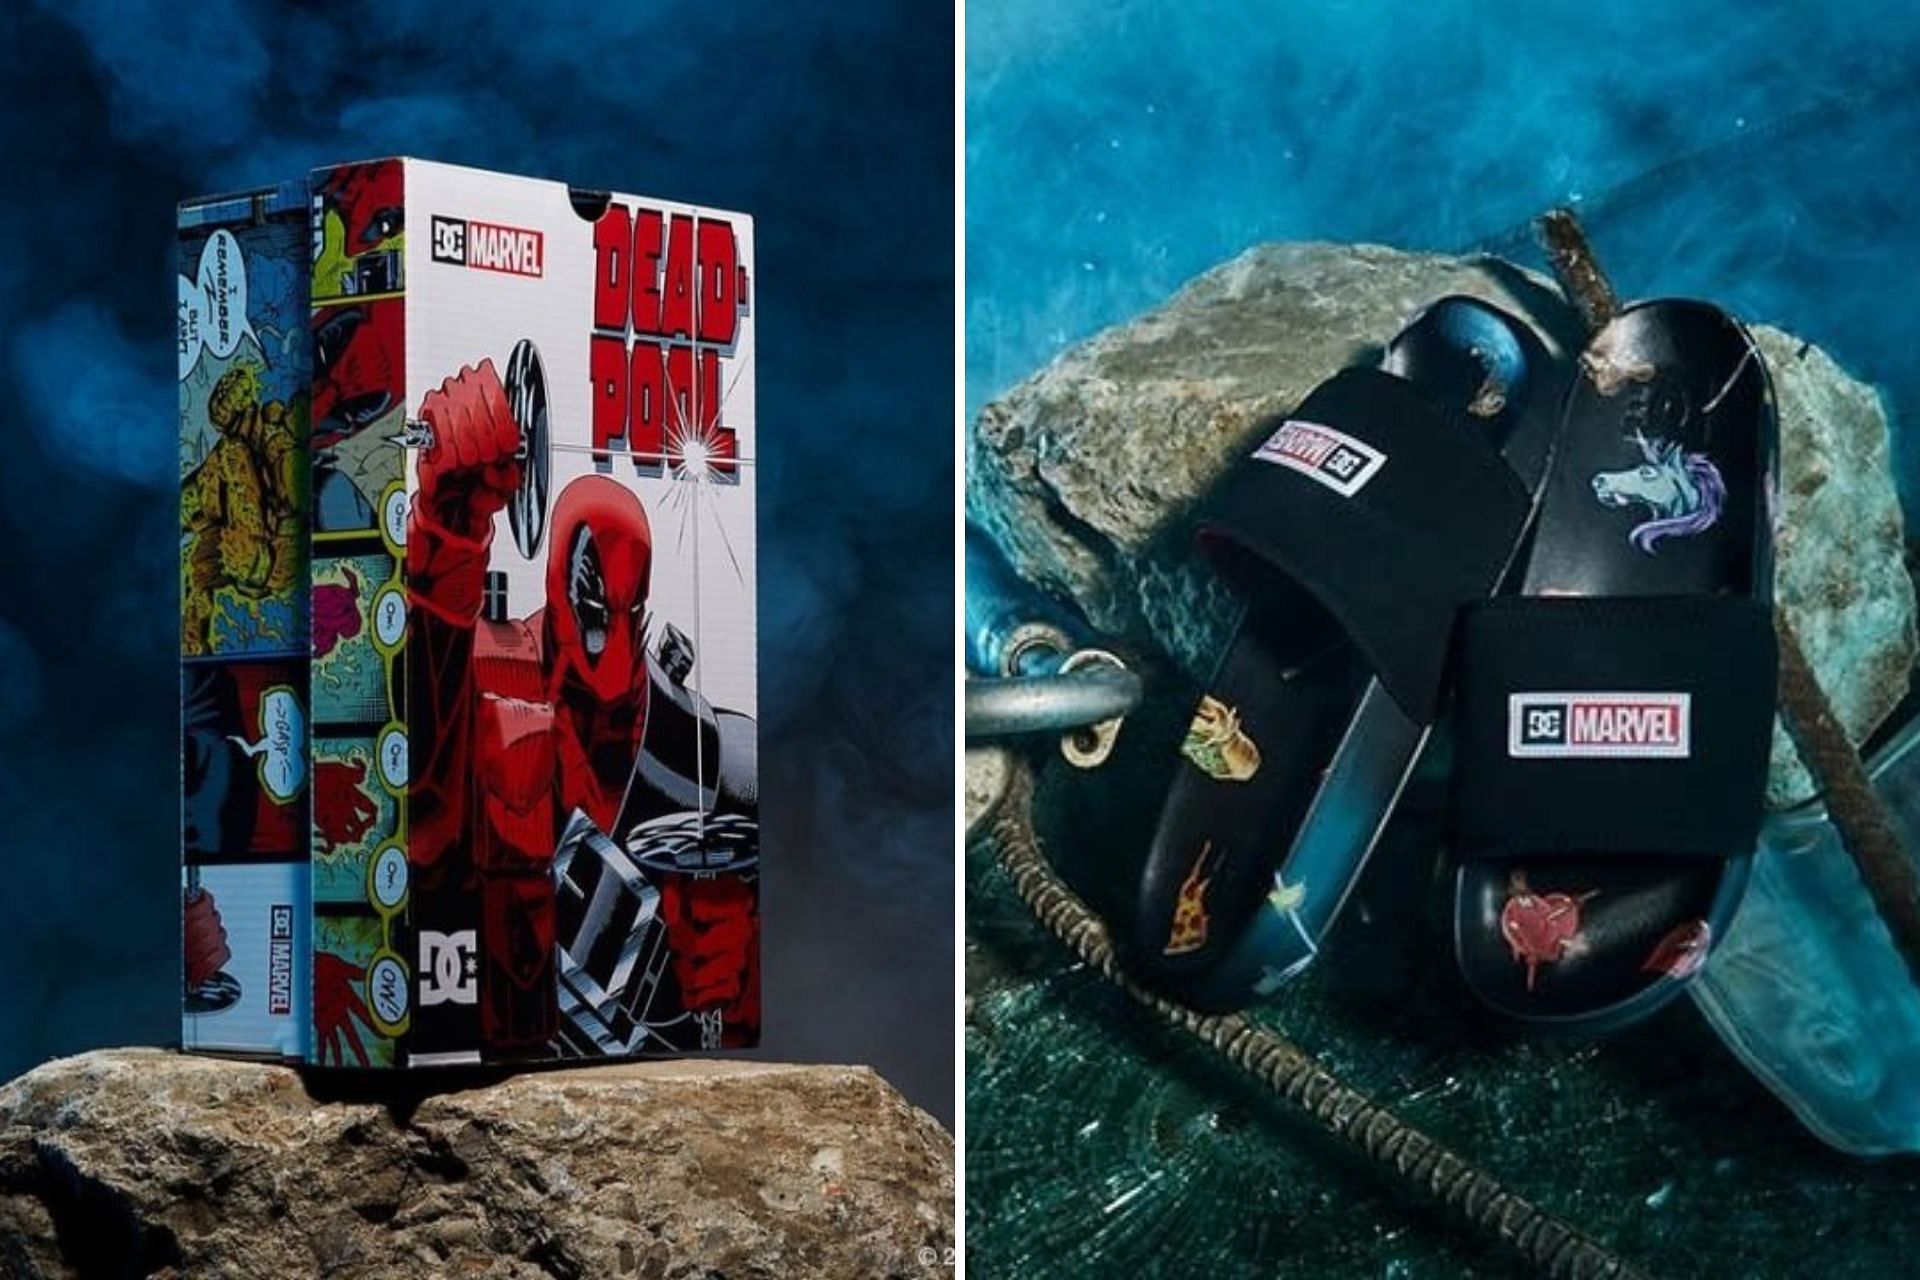 DC SHOES AND MARVEL INTRODUCE A NEW, FOURTH WALL-BREAKING, OFFBEAT DEADPOOL  COLLECTION